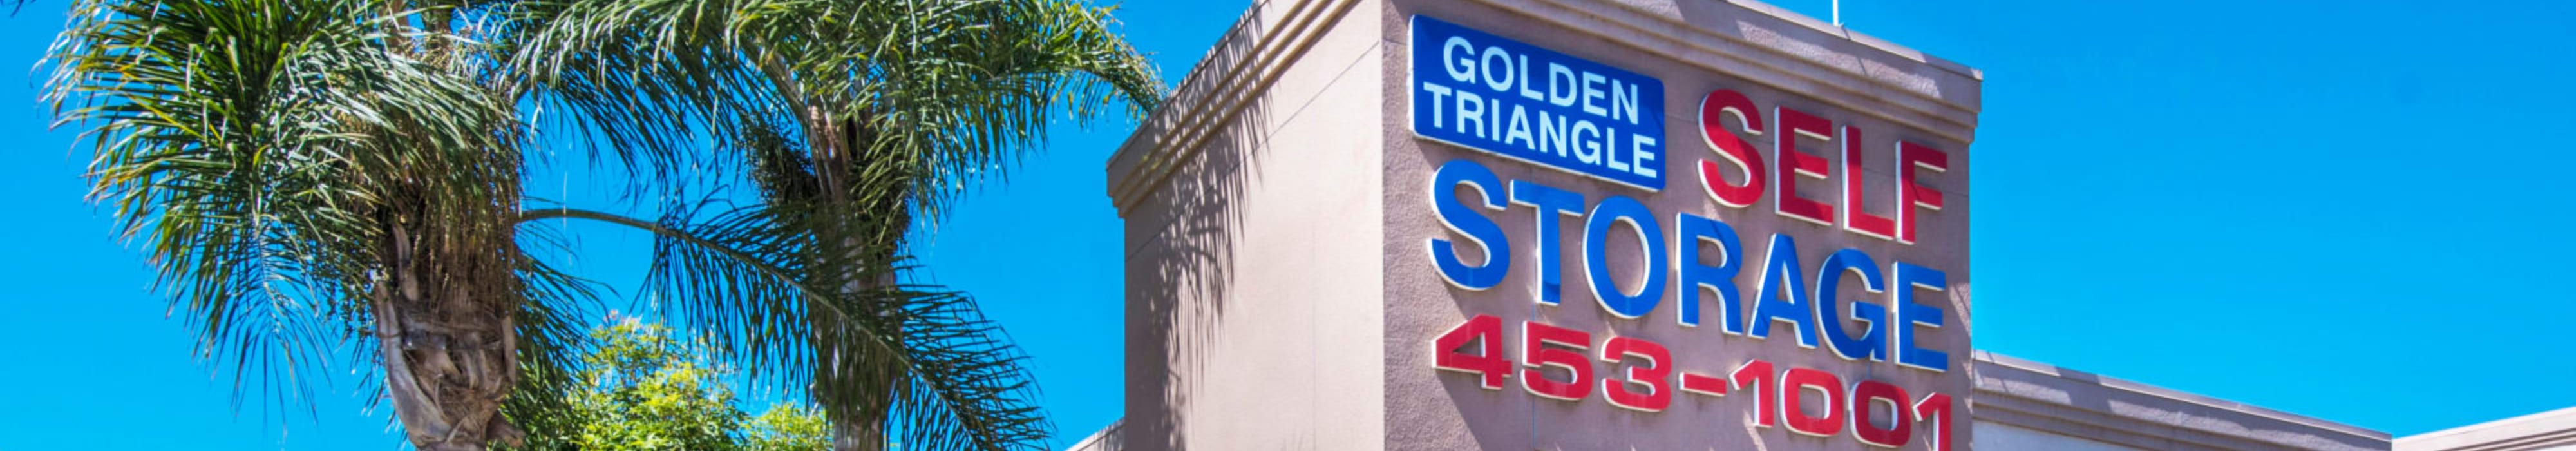 Branding on the exterior of Golden Triangle Self Storage in San Diego, California